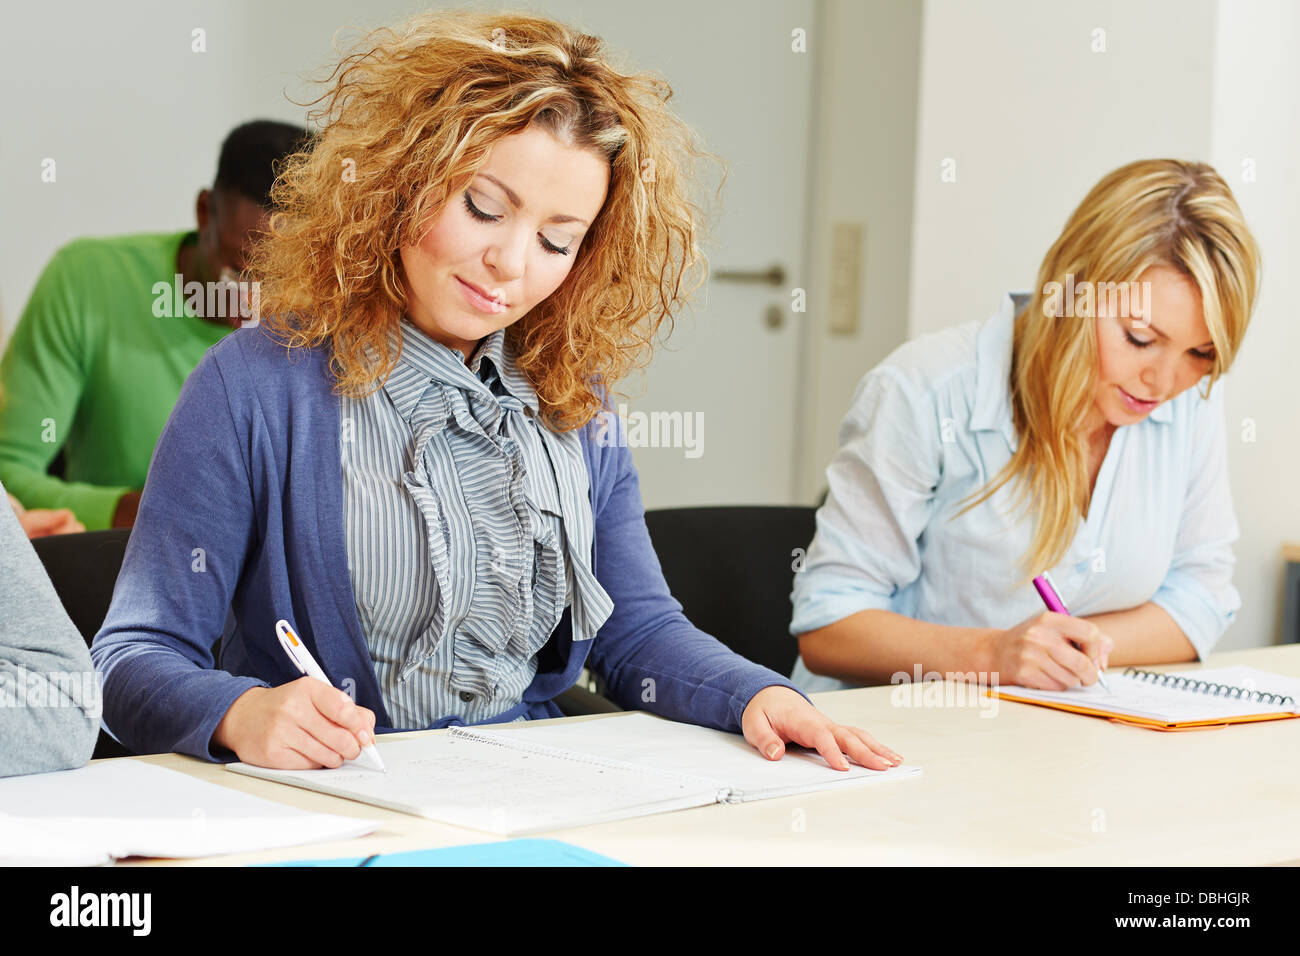 woman-in-assessment-center-taking-aptitude-test-for-employee-screening-stock-photo-alamy